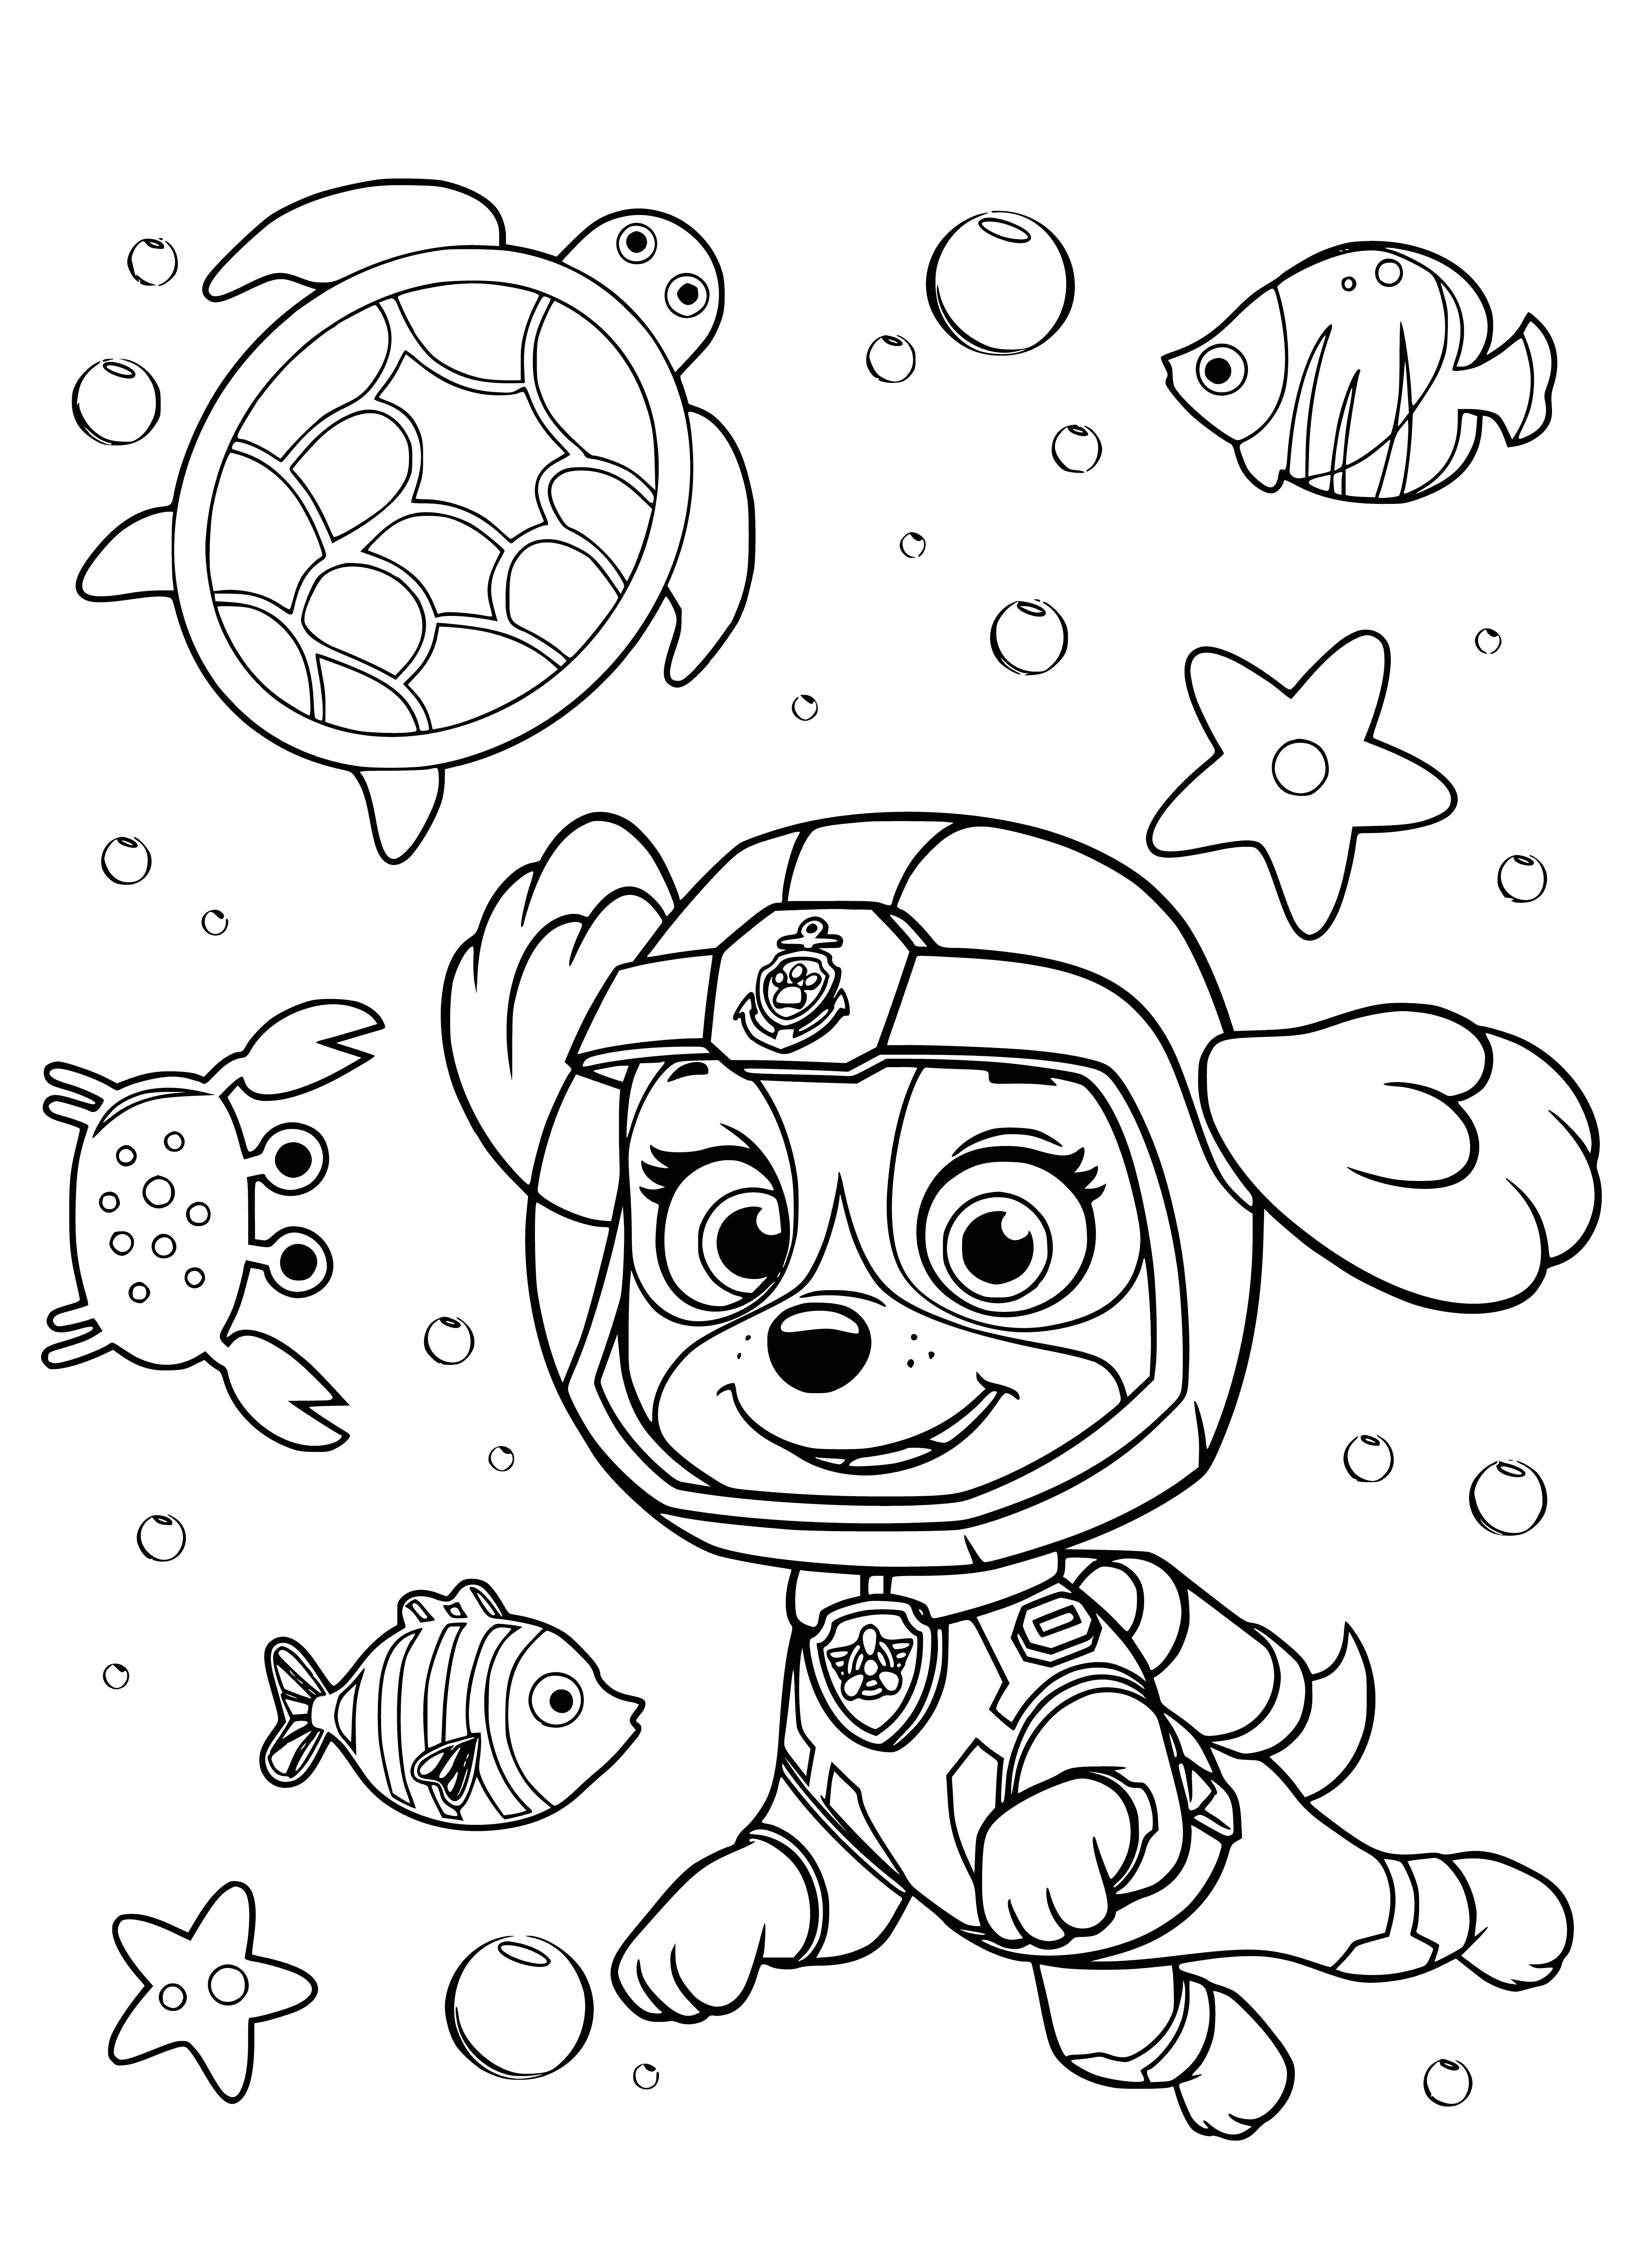 Sky in scuba diving coloring page